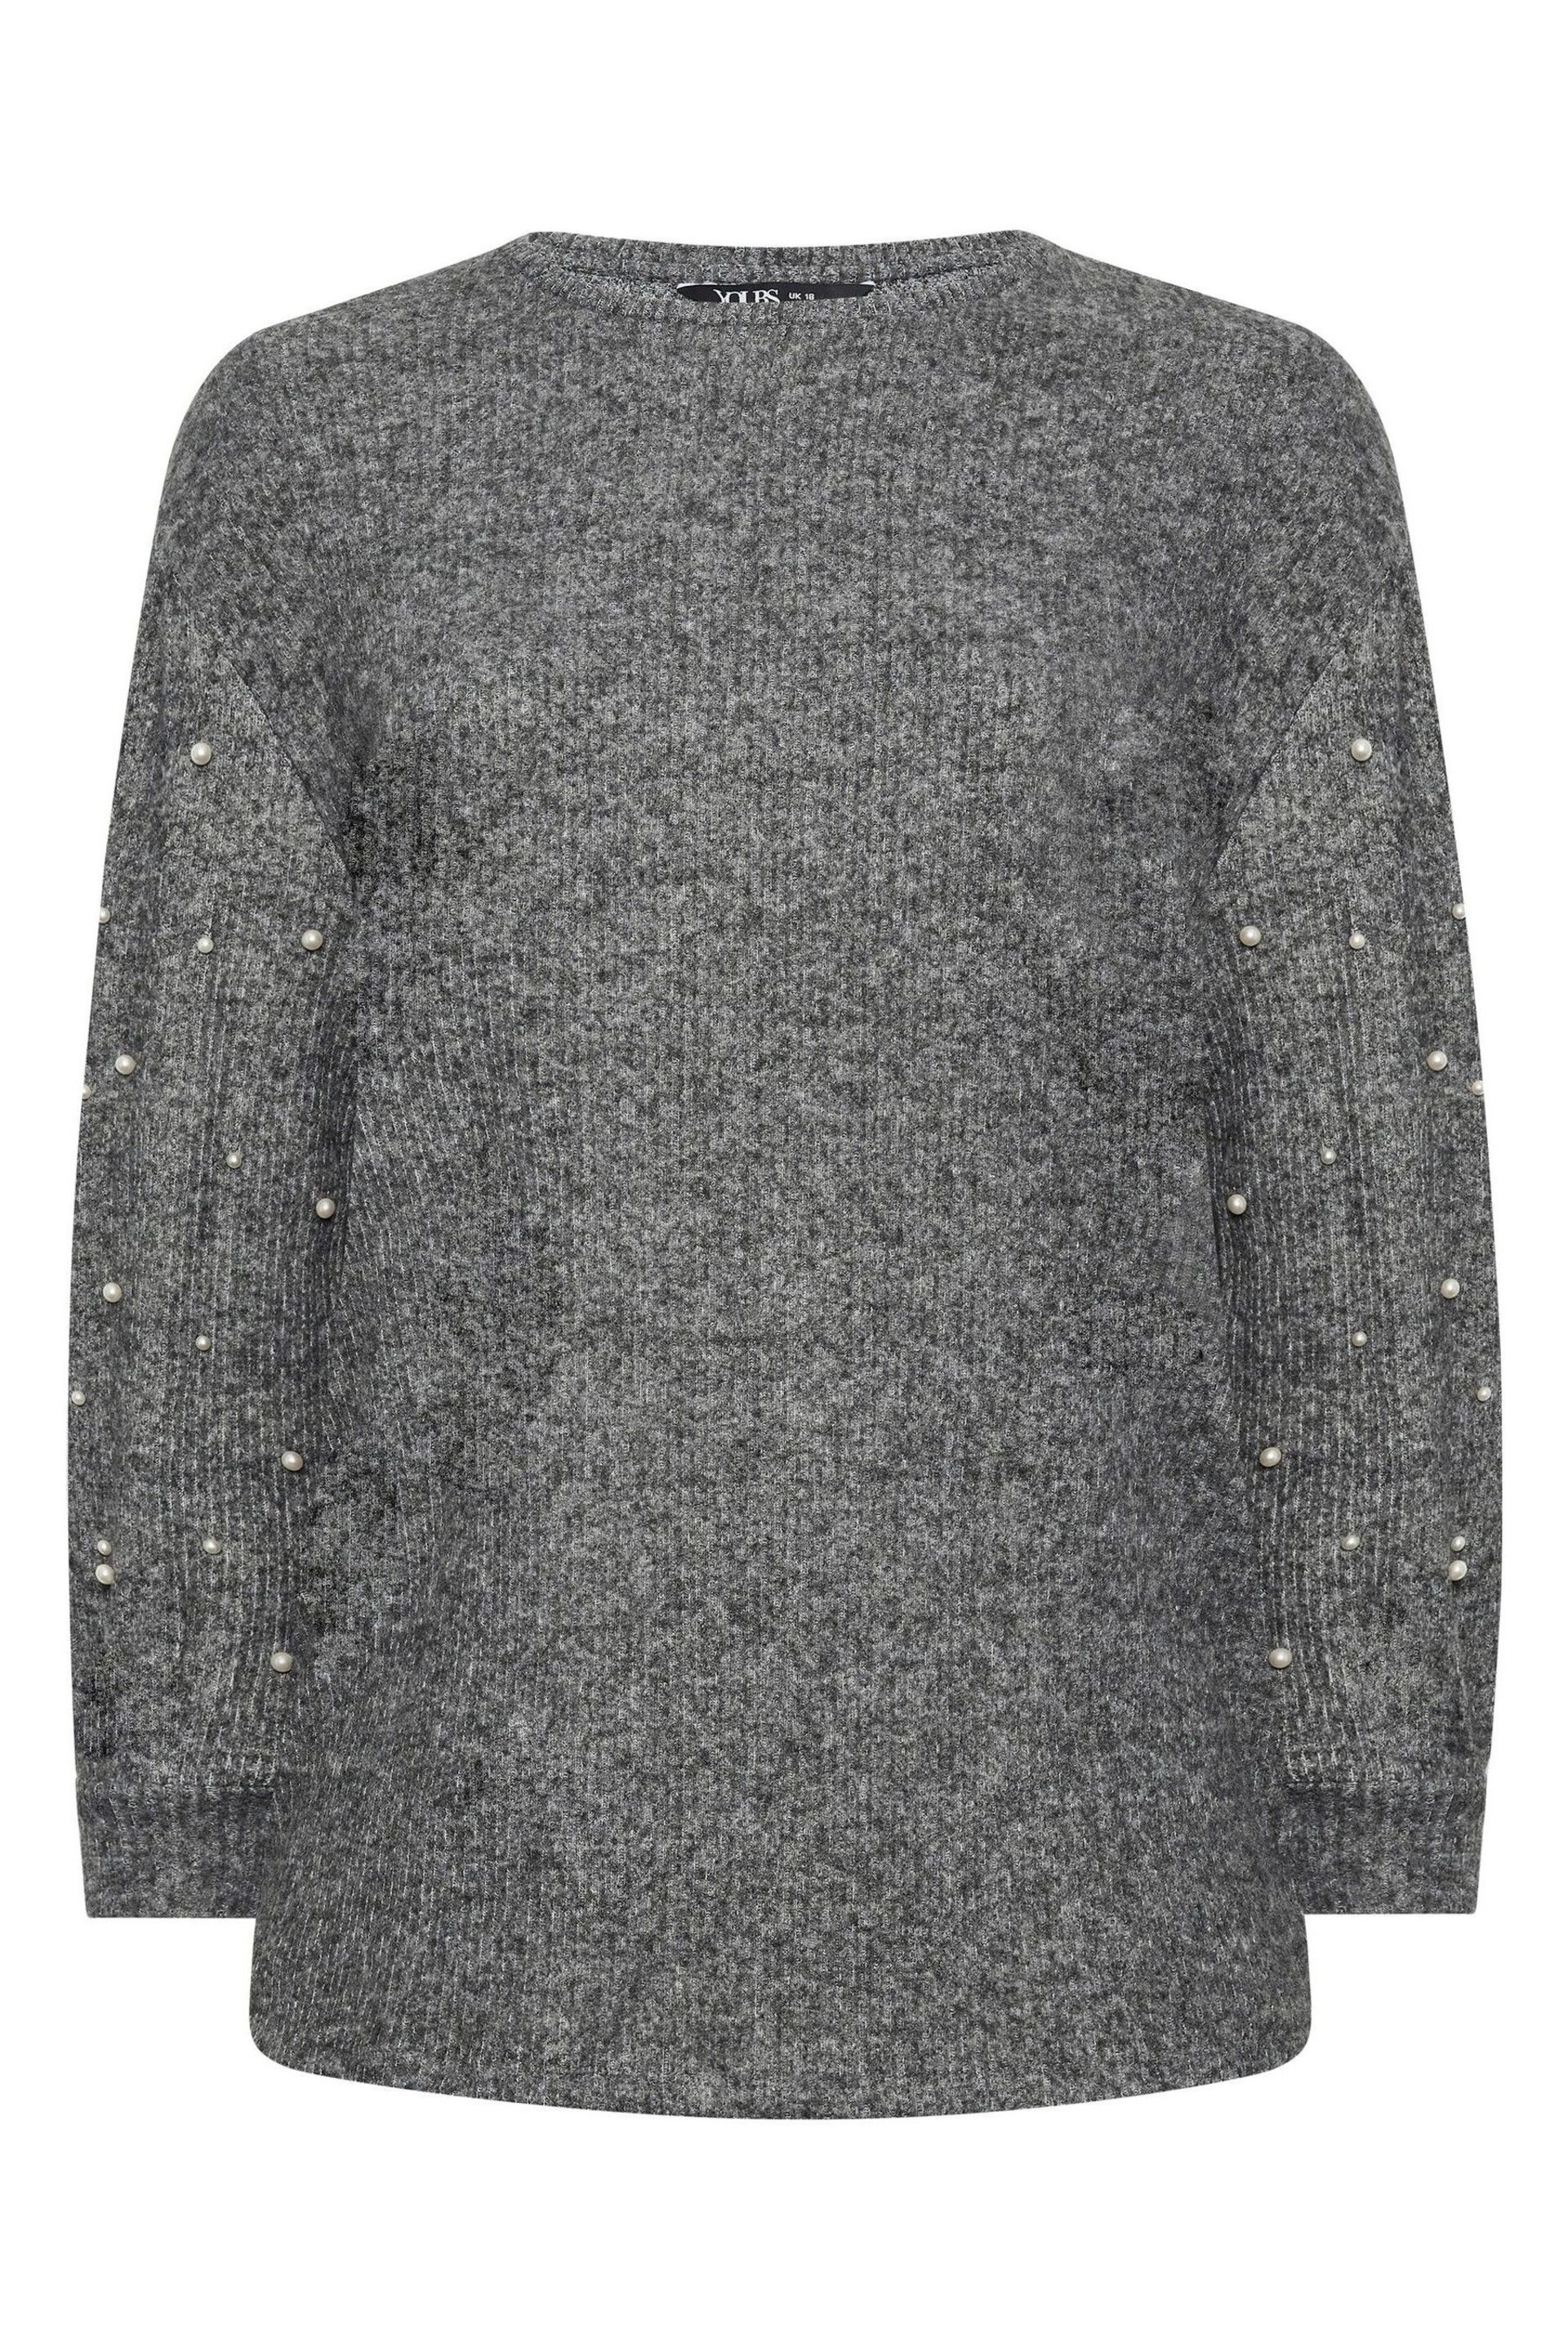 Yours Curve Grey Soft Touch Pearl Embellished Sweatshirt - Image 5 of 5